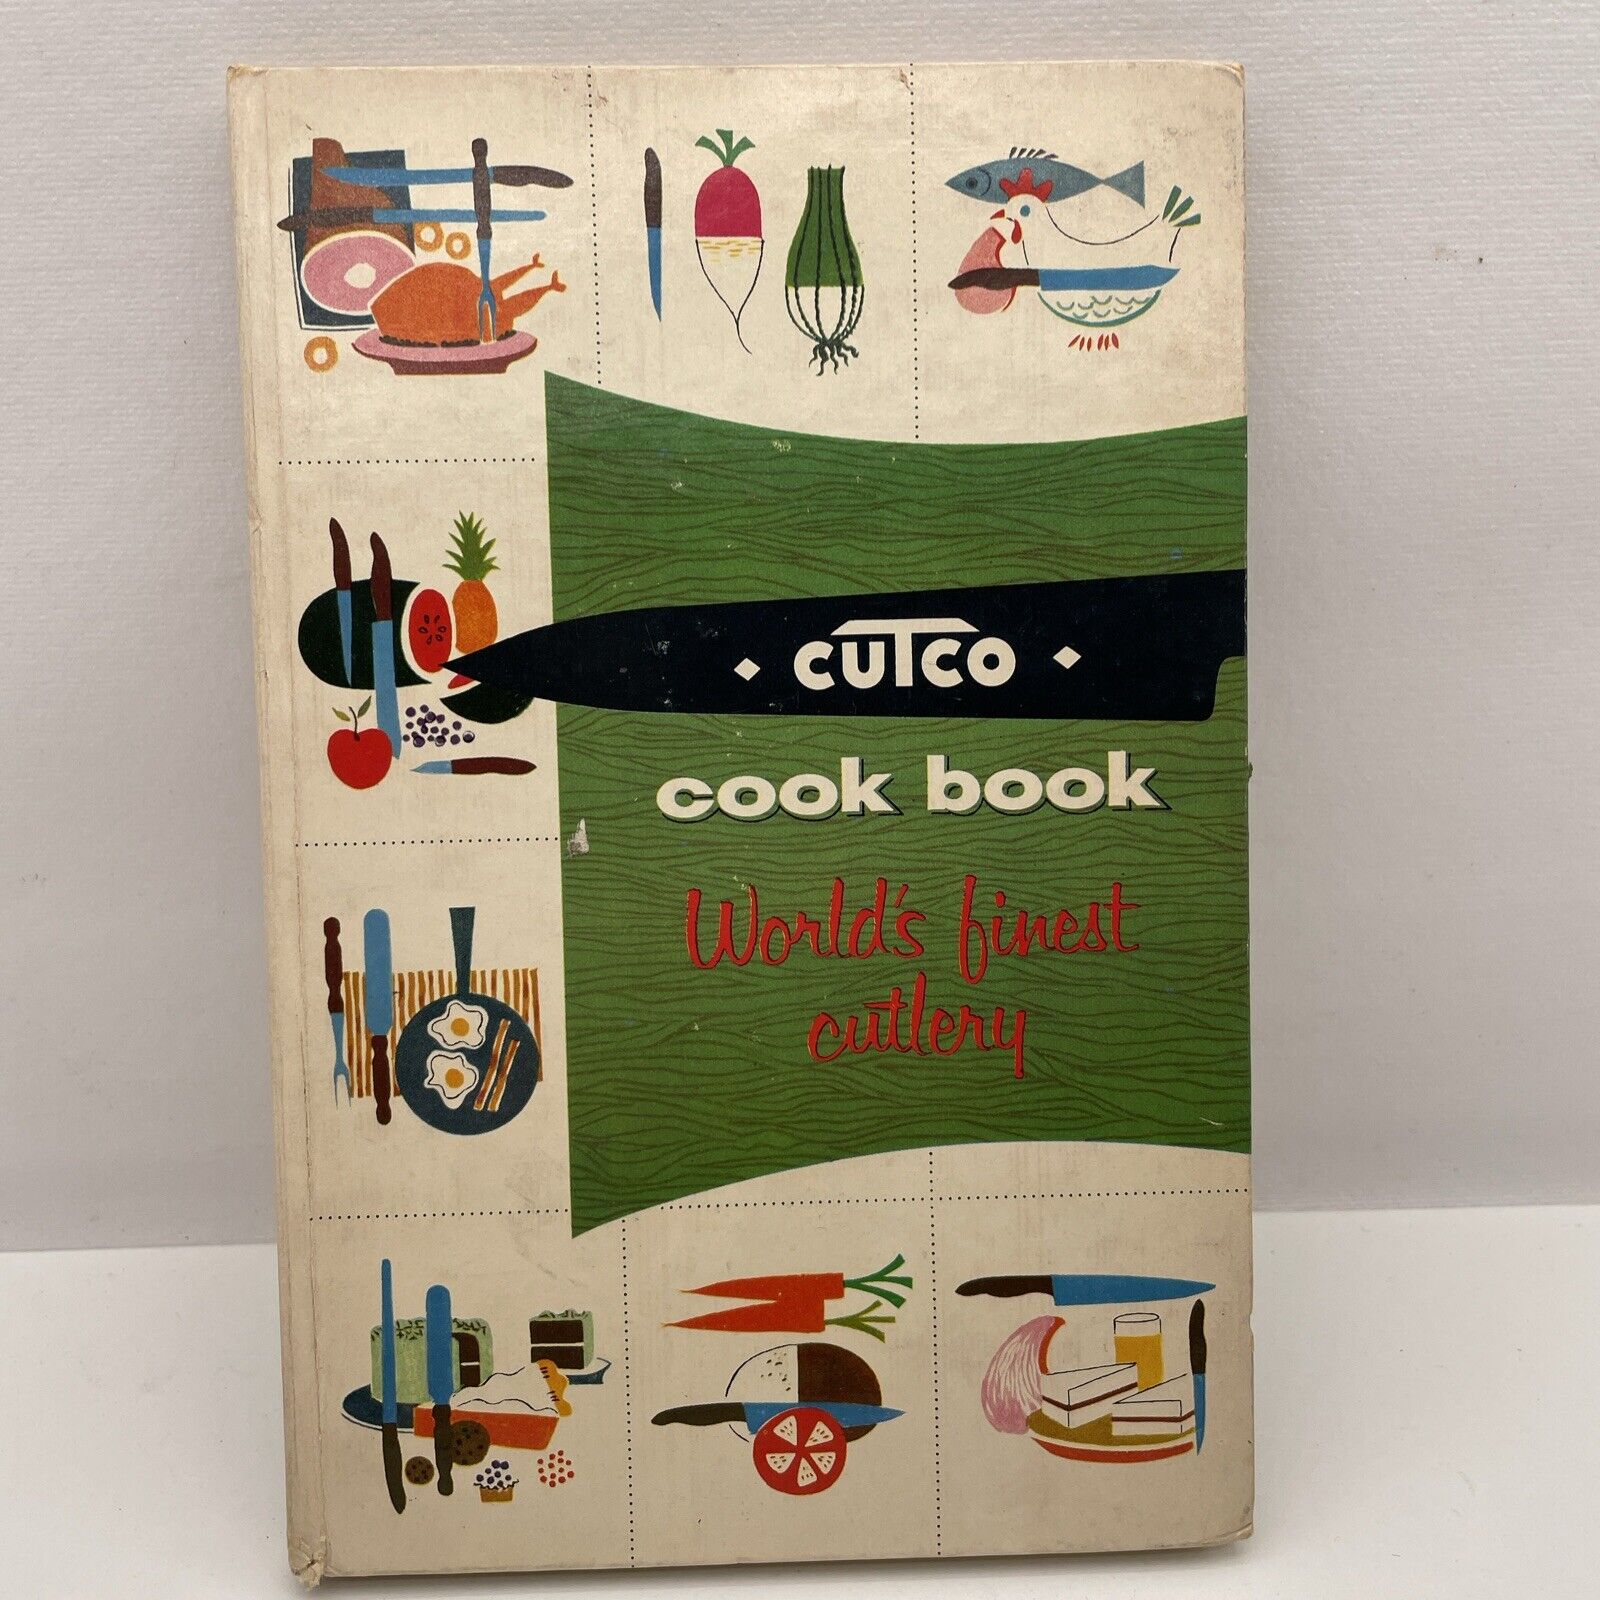 Cutco 1961 Vintage Cook Book World\'s Finest Cutlery Recipes Meat Cuts Knives